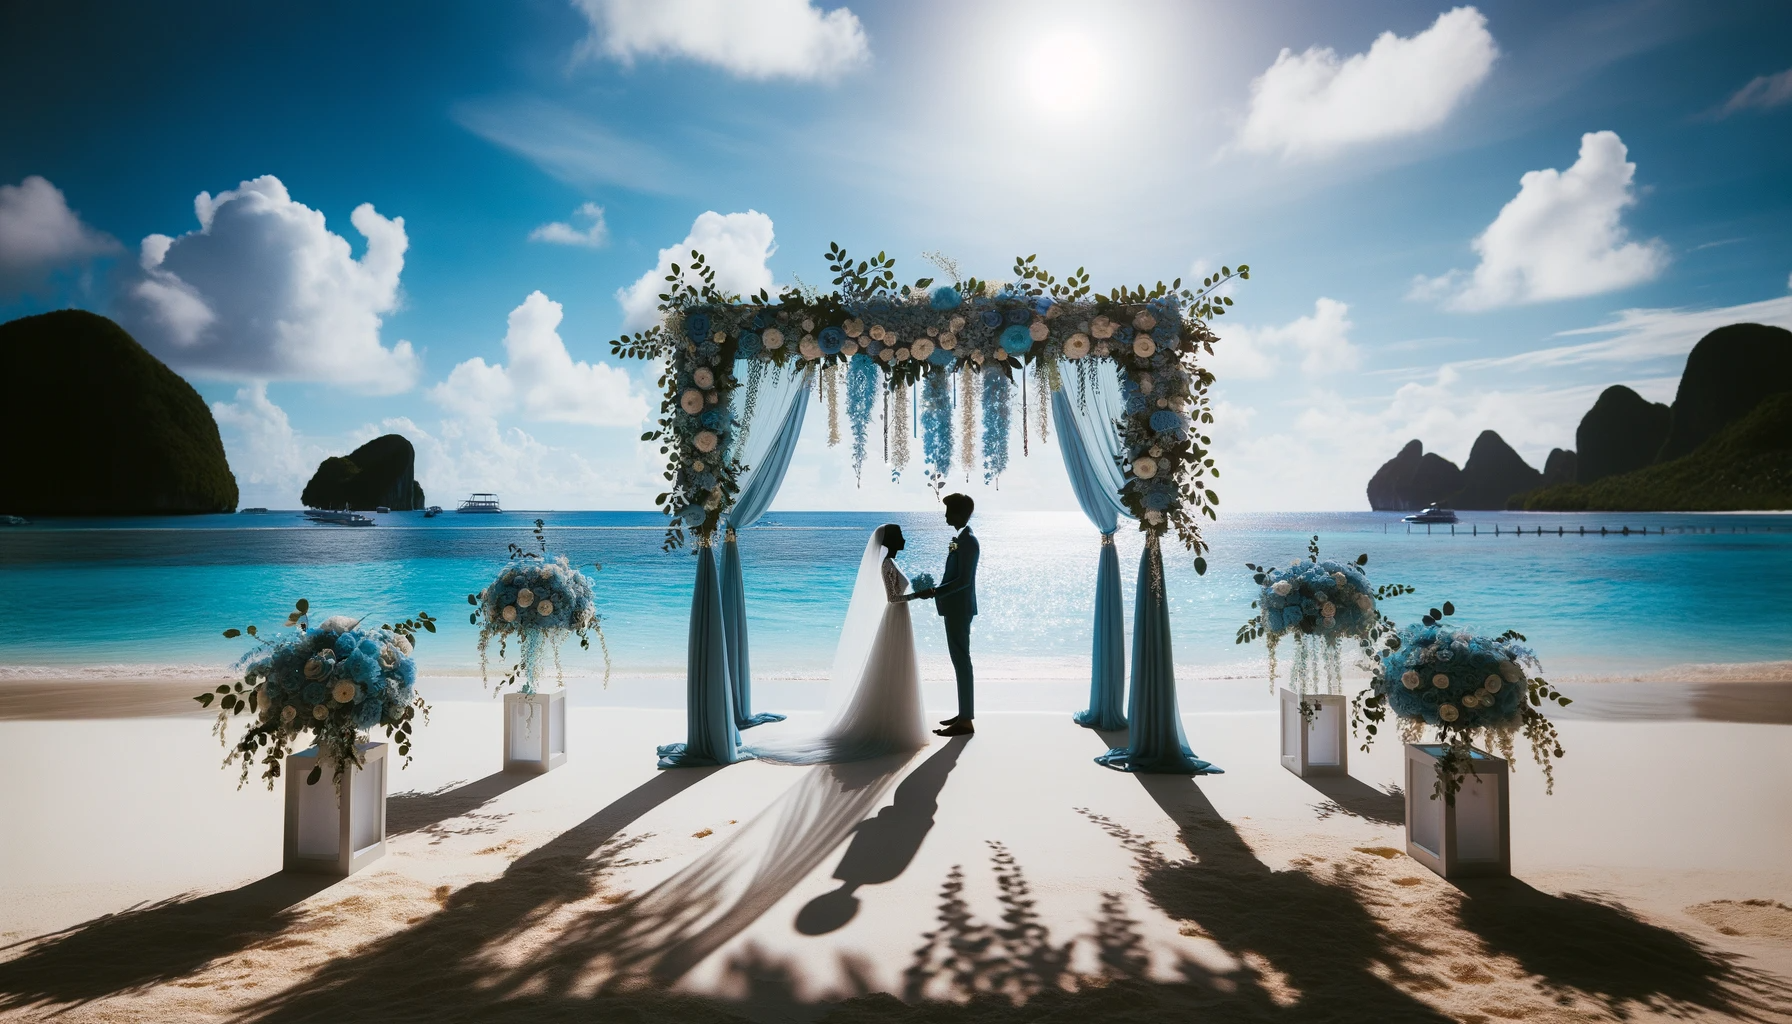 Planning a Destination Wedding? Why Blue Skies Beach Resort Is the Perfect Choice